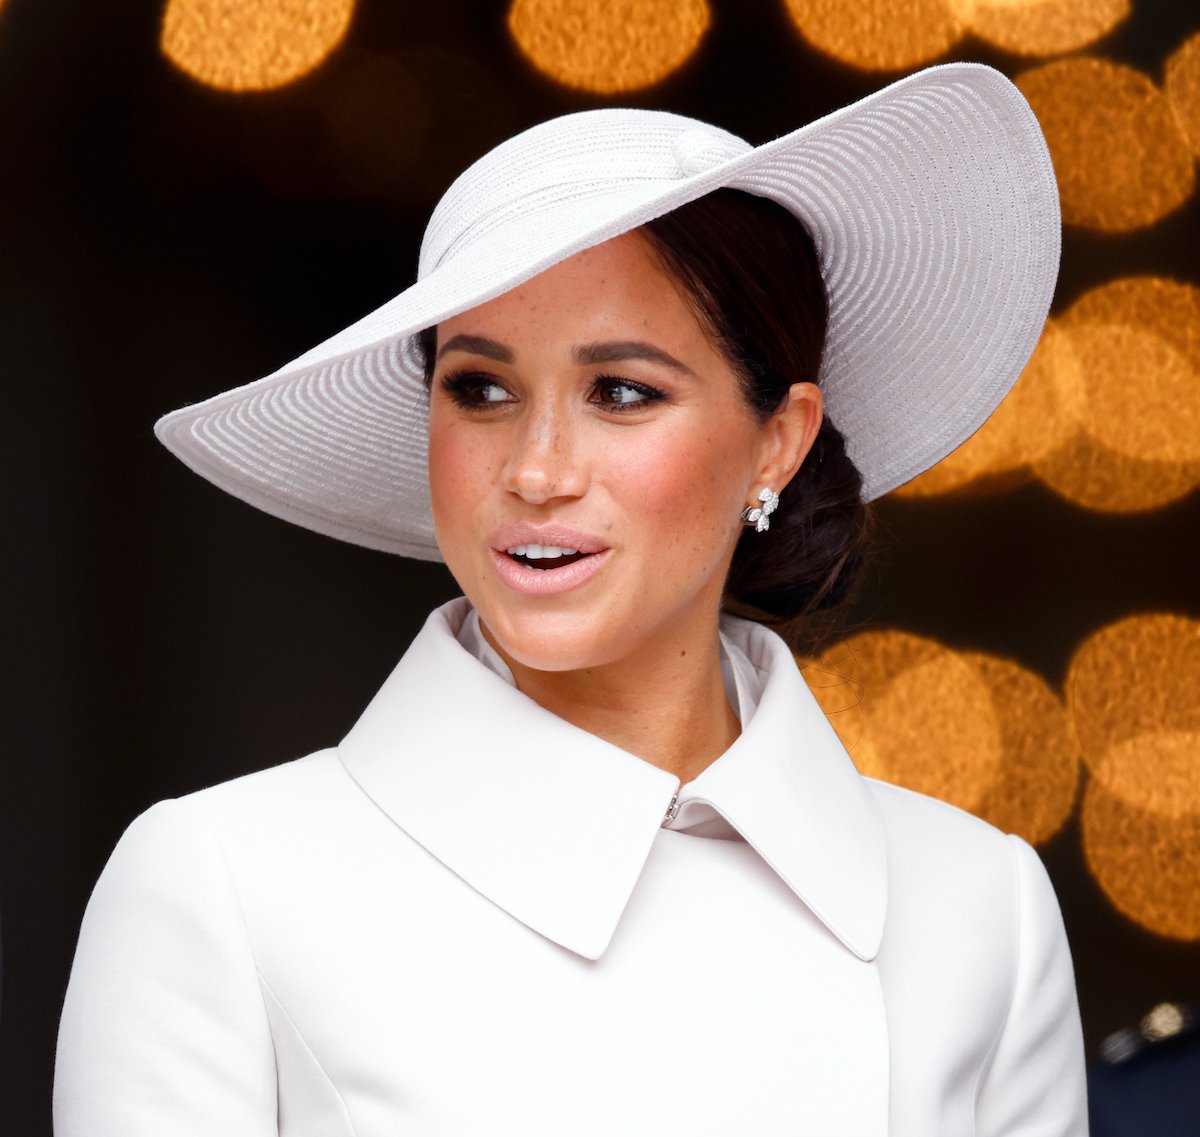 Meghan Markle Says Her Home Life 'Will Only Get More Chaotic' as Her ...